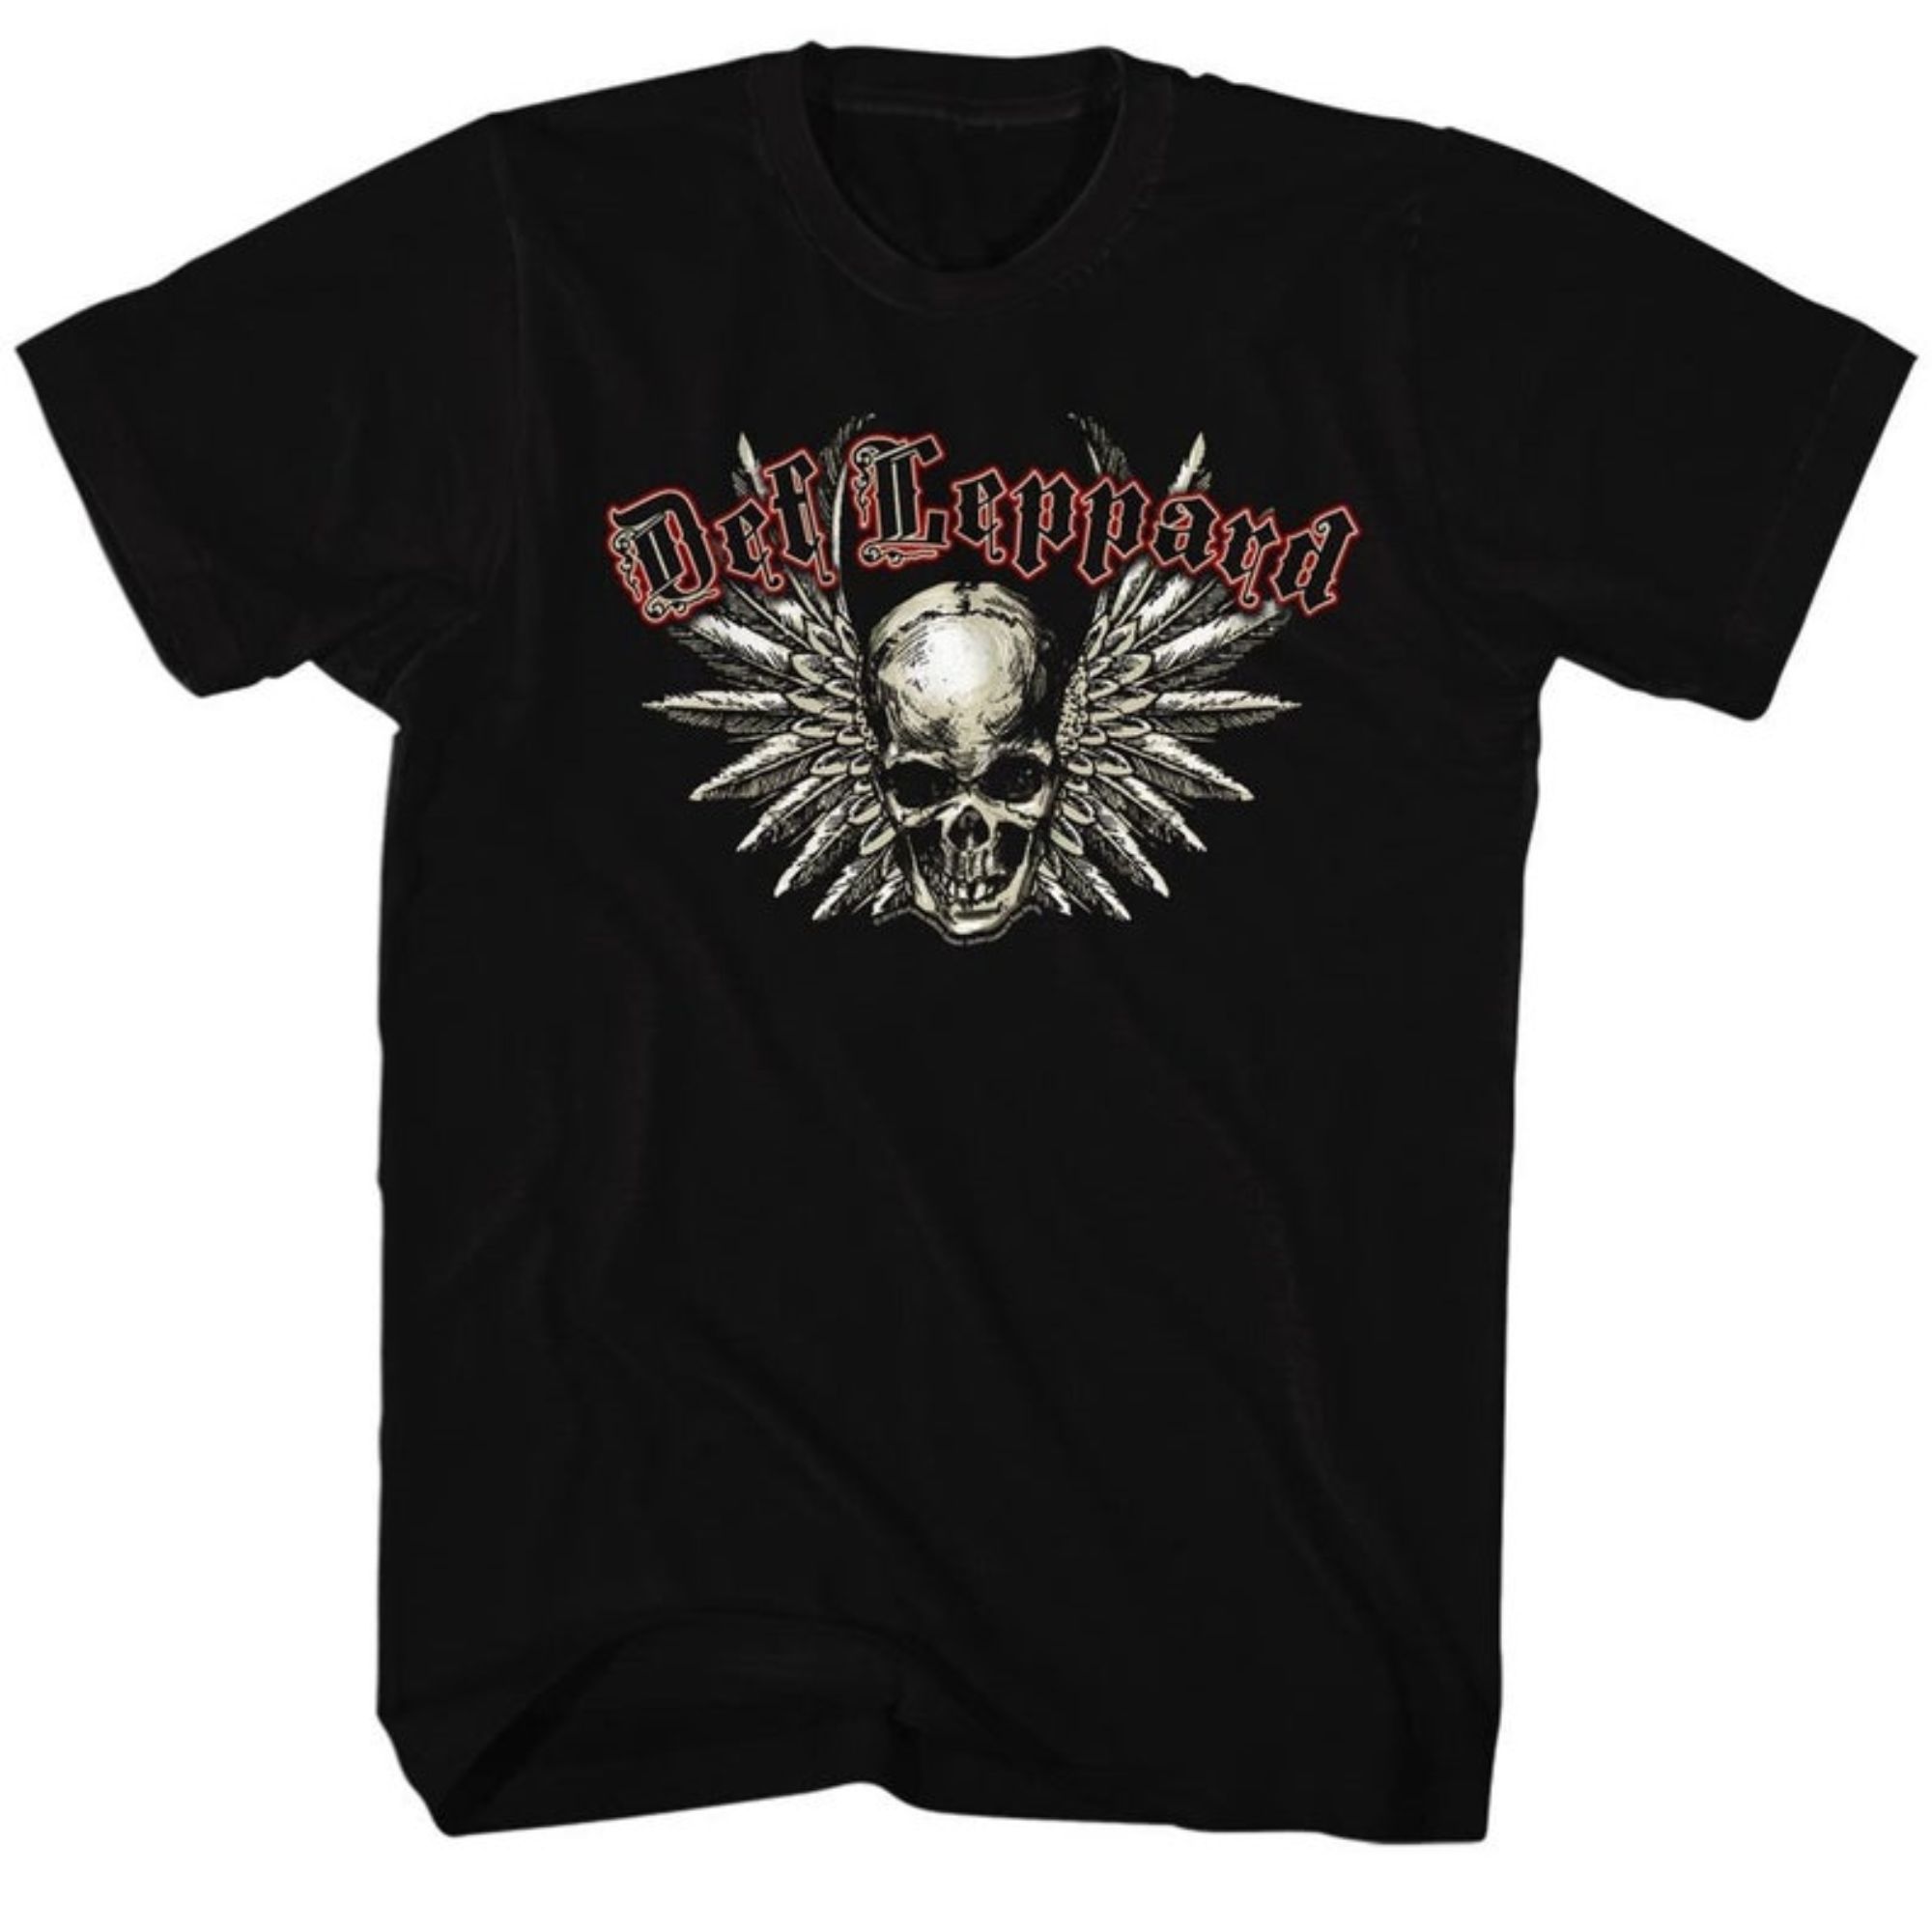 def leppard skull and wings logo black shirts